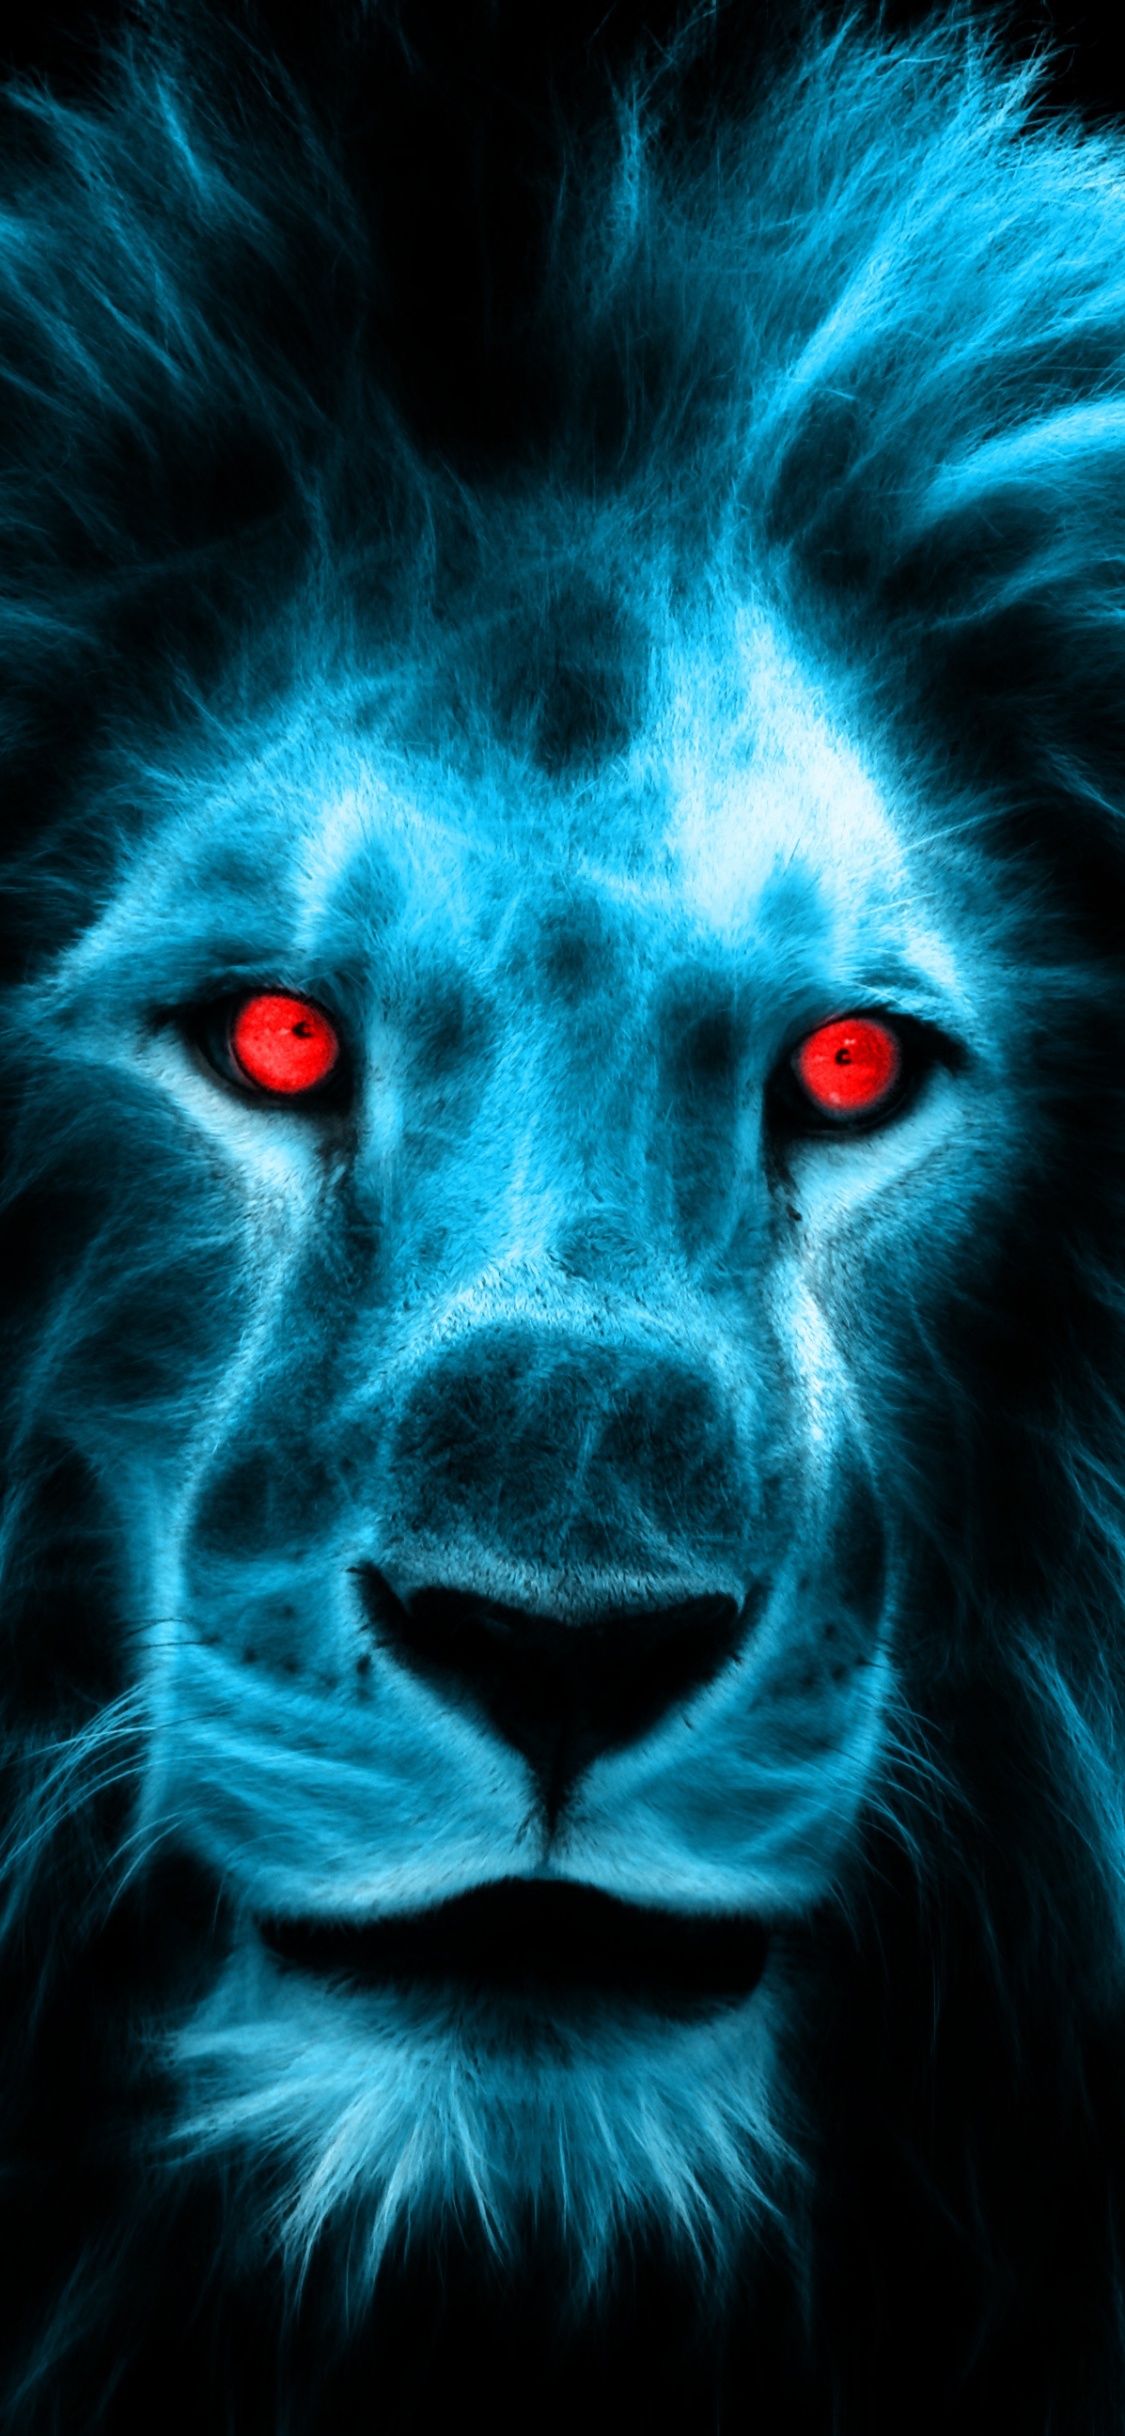 Lion With Blue Eyes Illustration. Wallpaper in 1125x2436 Resolution